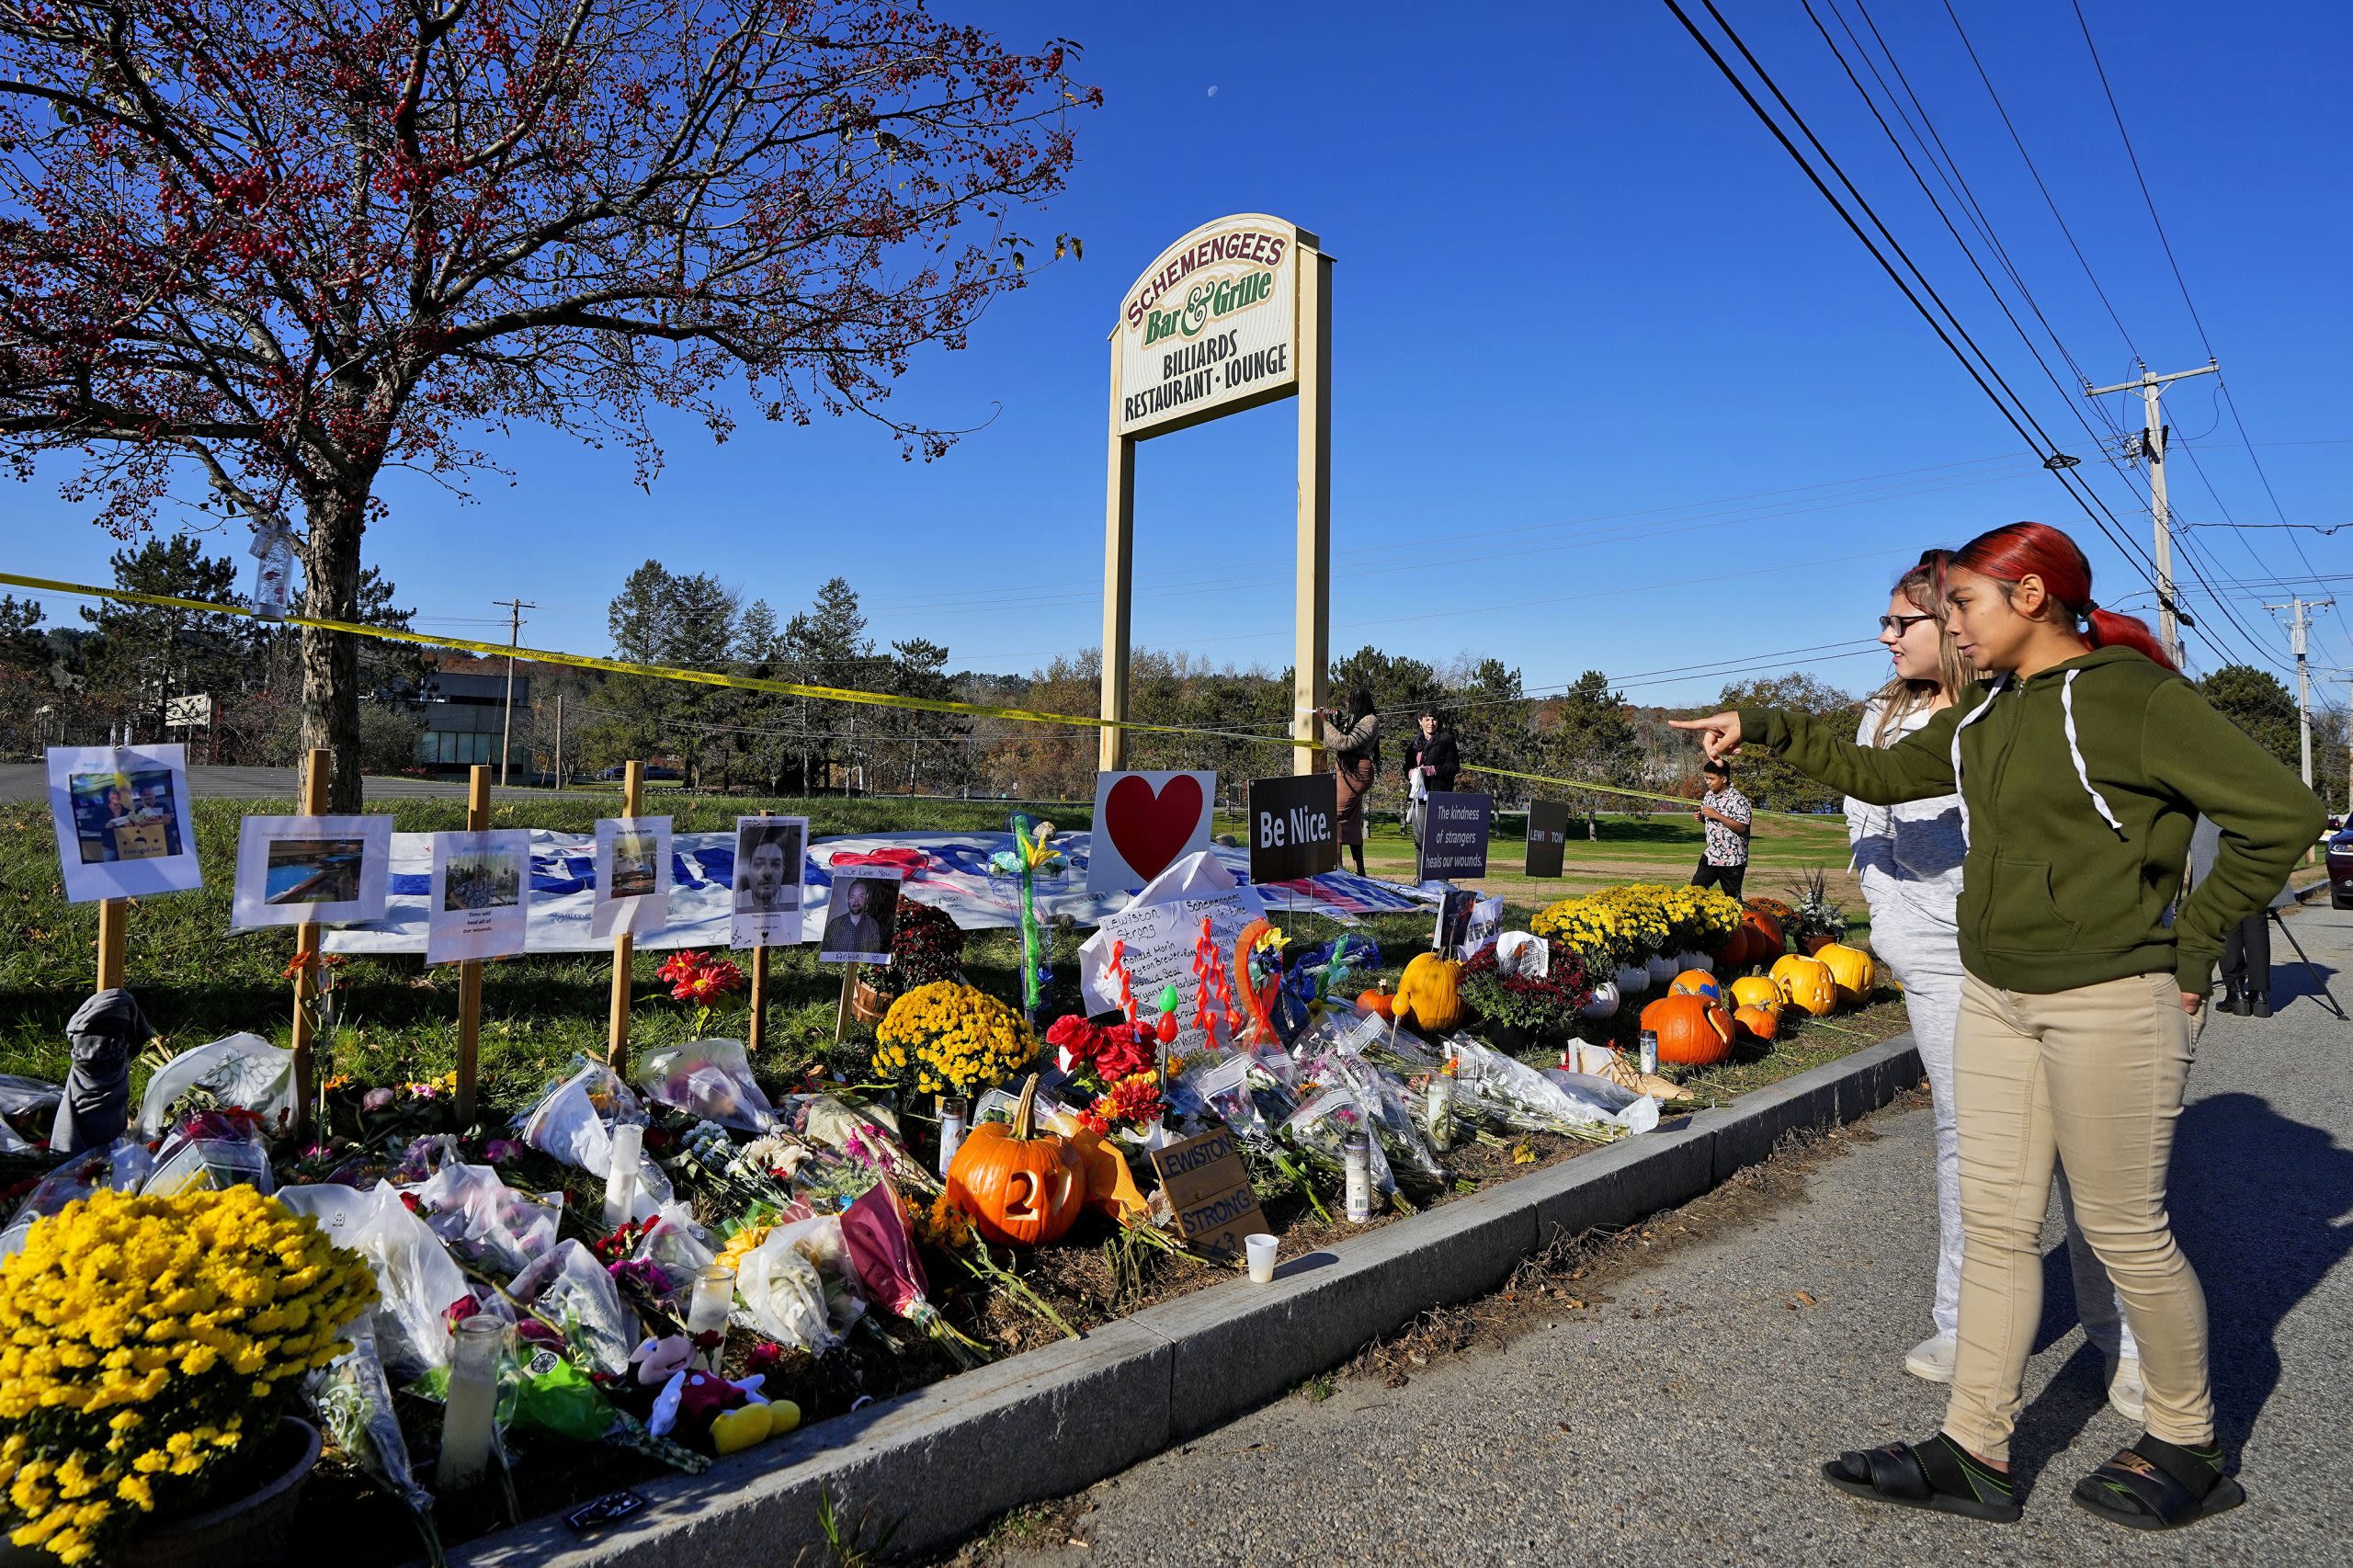 Long-awaited Army reports on Maine mass shooter coming soon